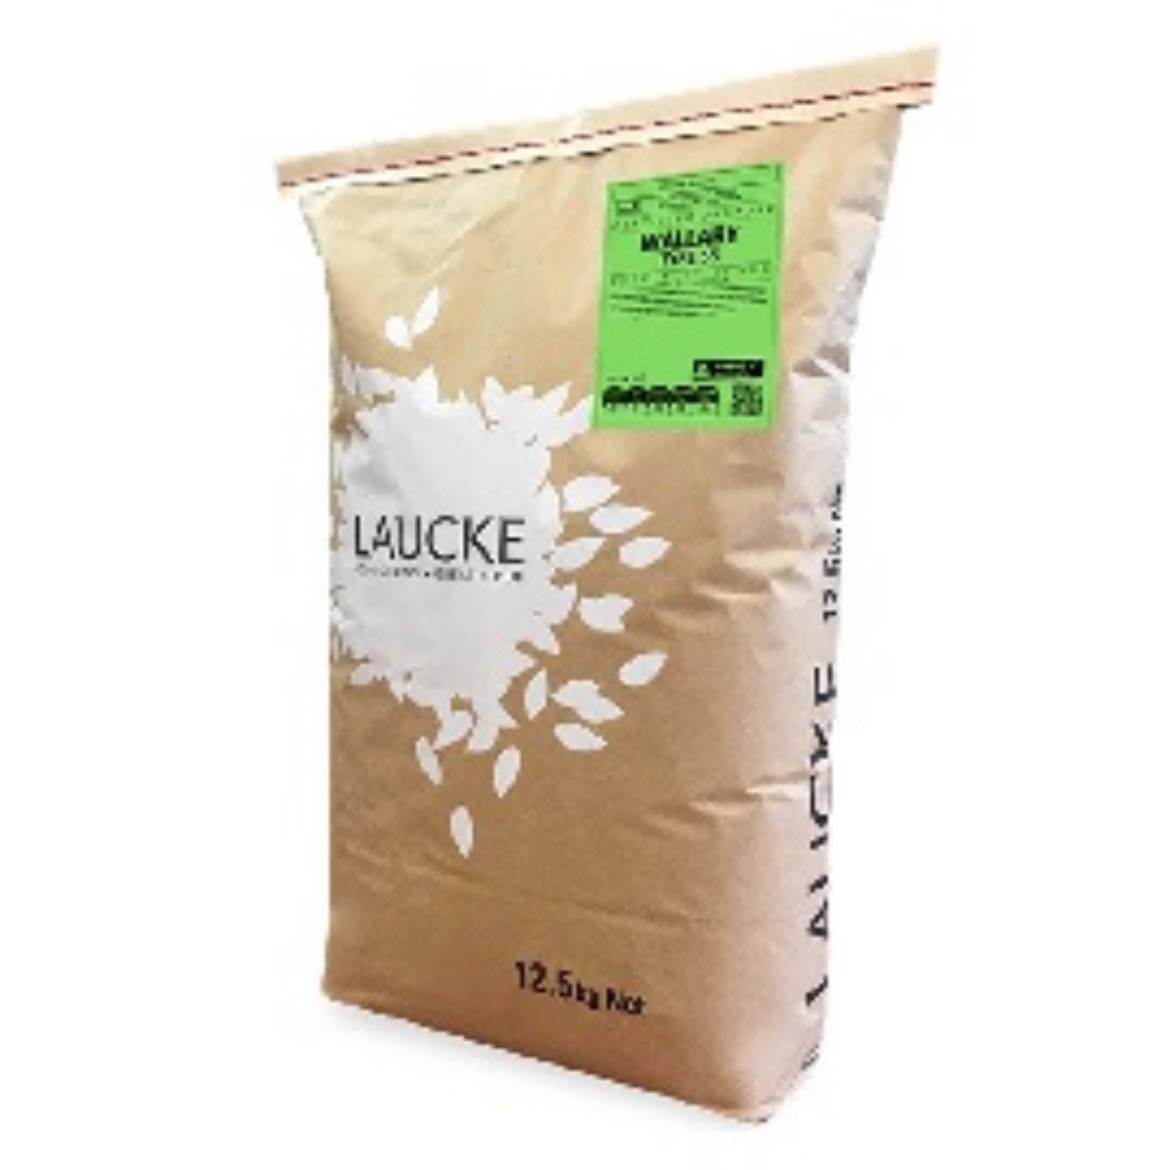 Picture of 12.5KG LAUCKE WALLABY BAKERS FLOUR